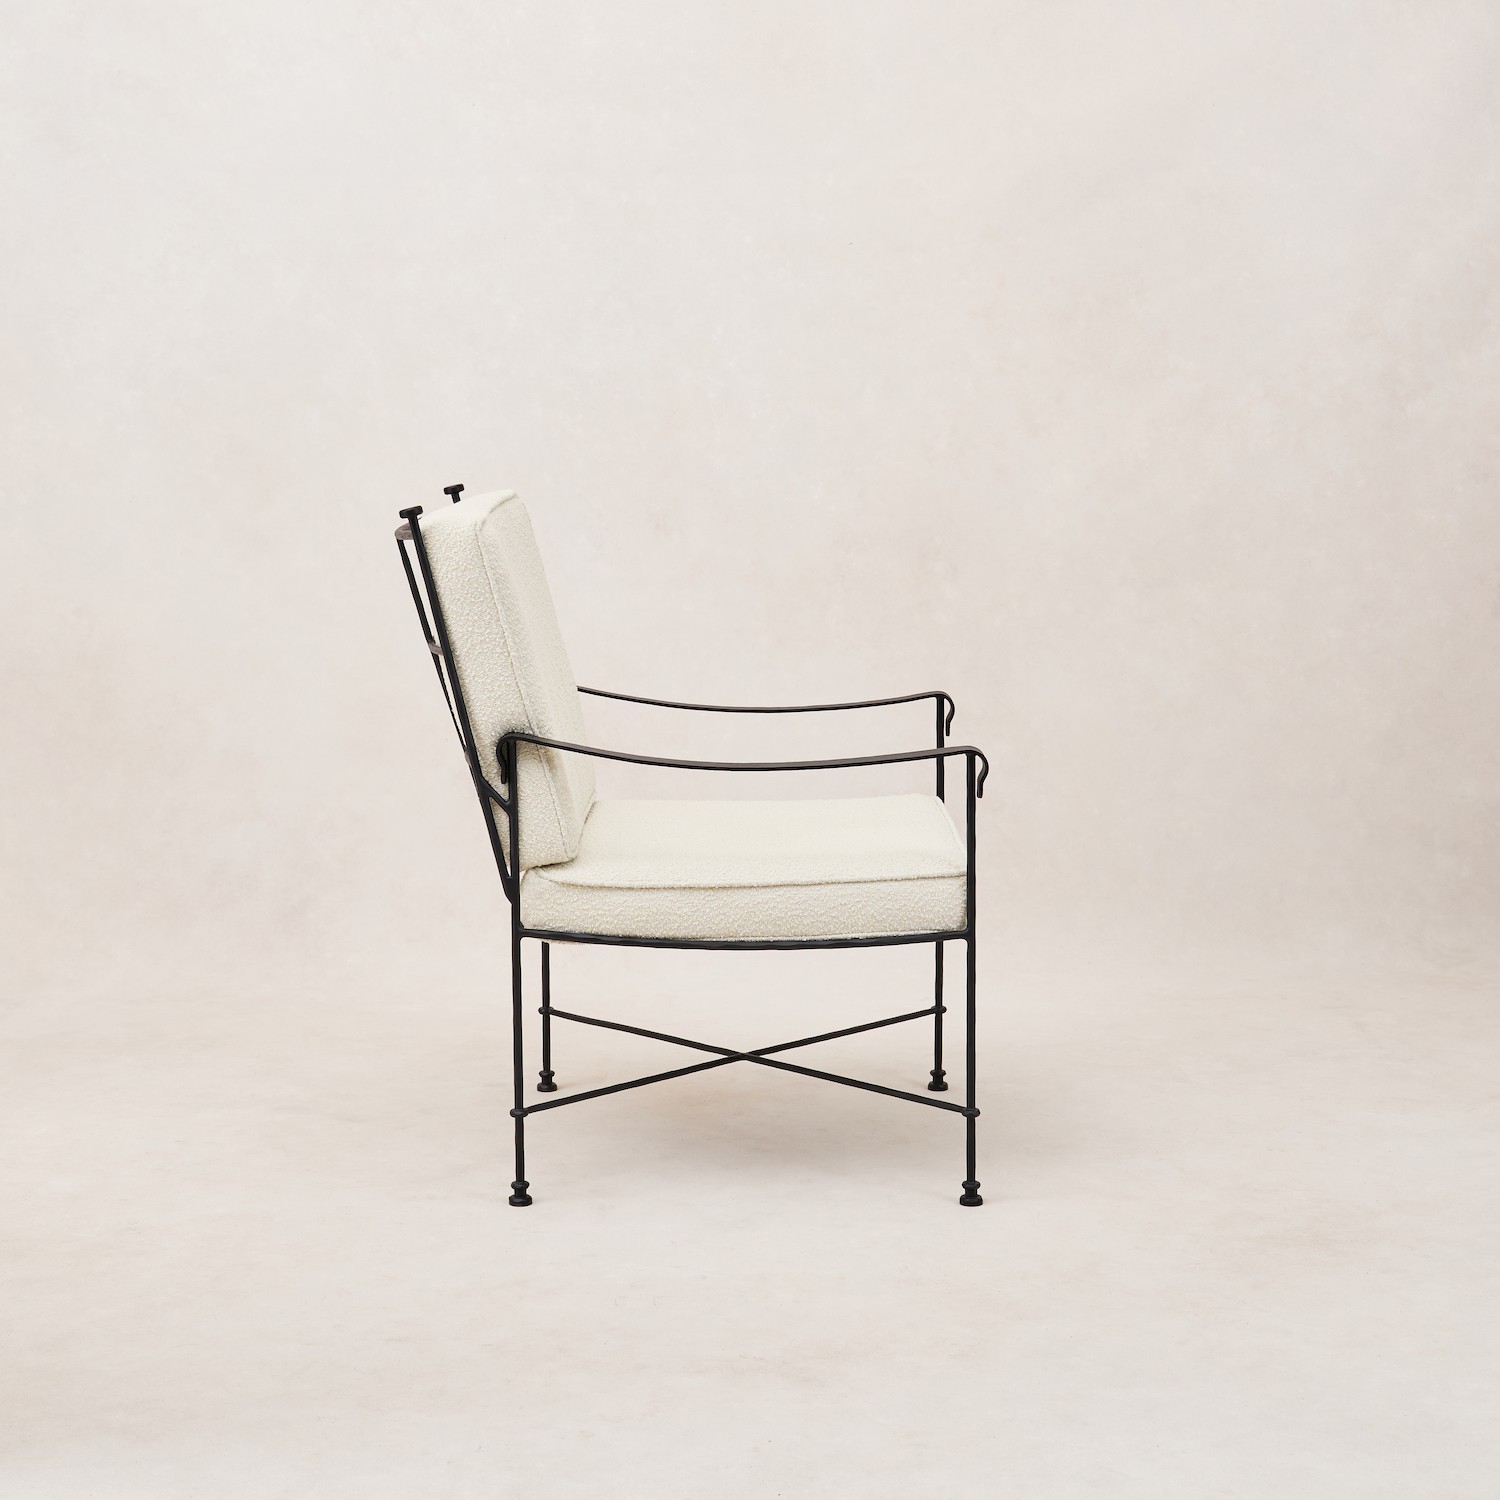 a black and white chair with a white upholstered seat